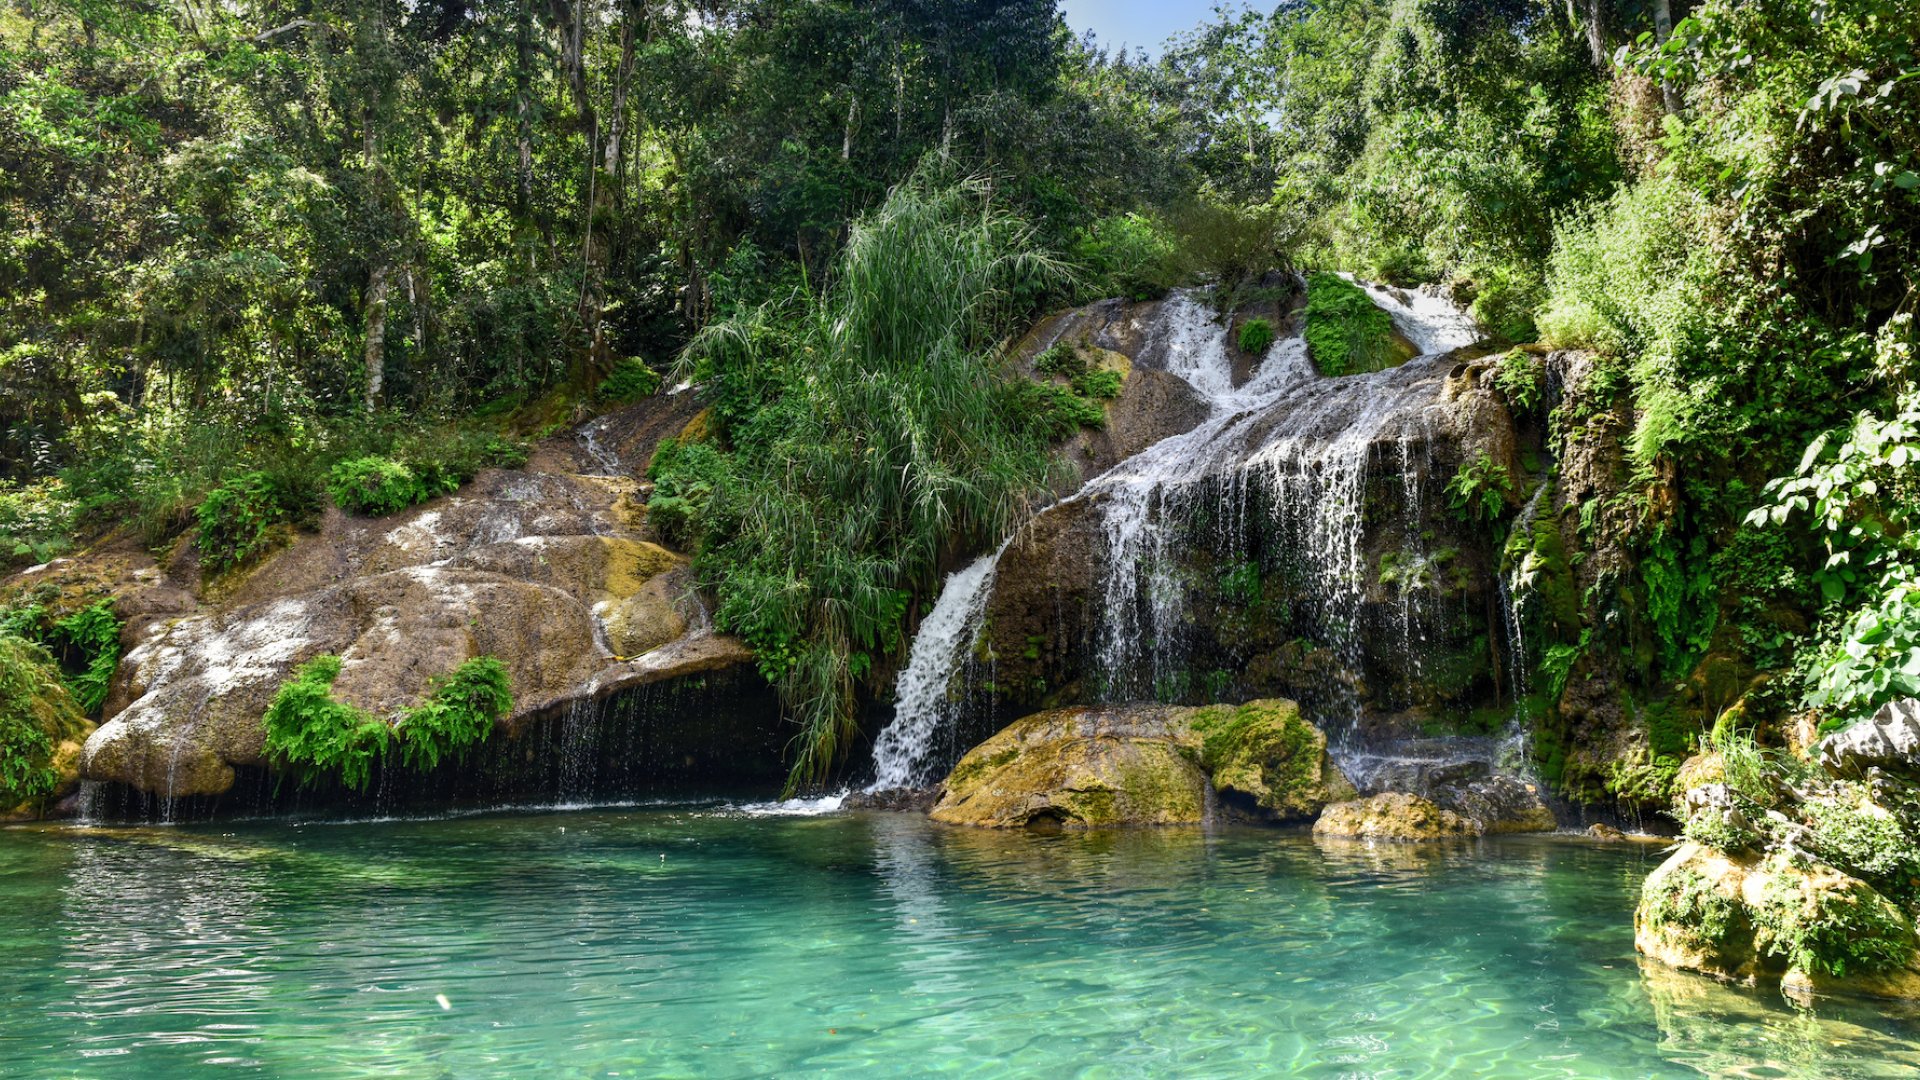 Small waterfall going into a turquoise pool in a lush forest in Cuba